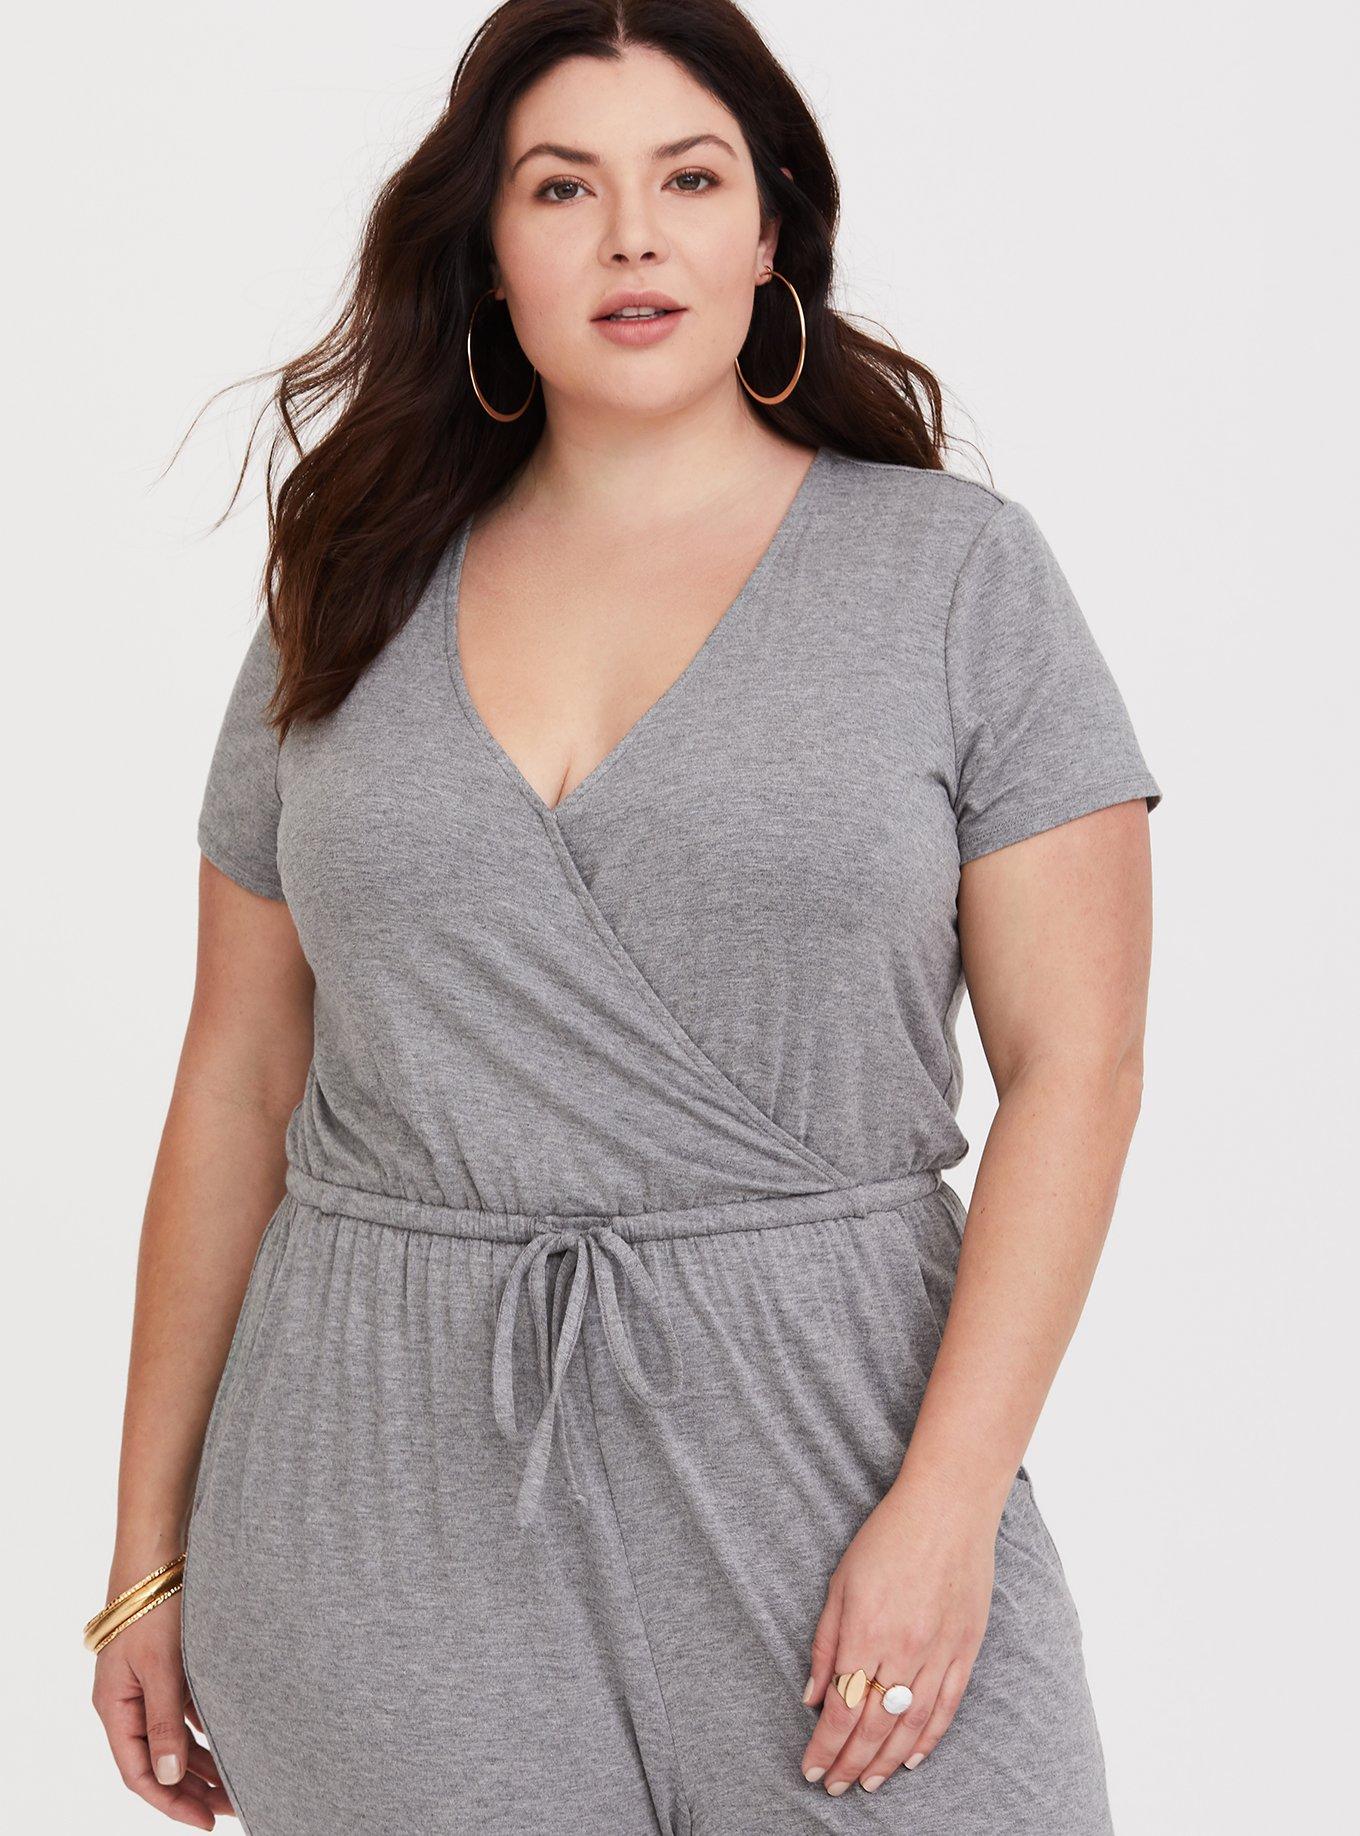 Sexy Jersey Romper Jumpsuit Hoodie with Hoodie Zip Up Cinched Waist Lounge  Wear